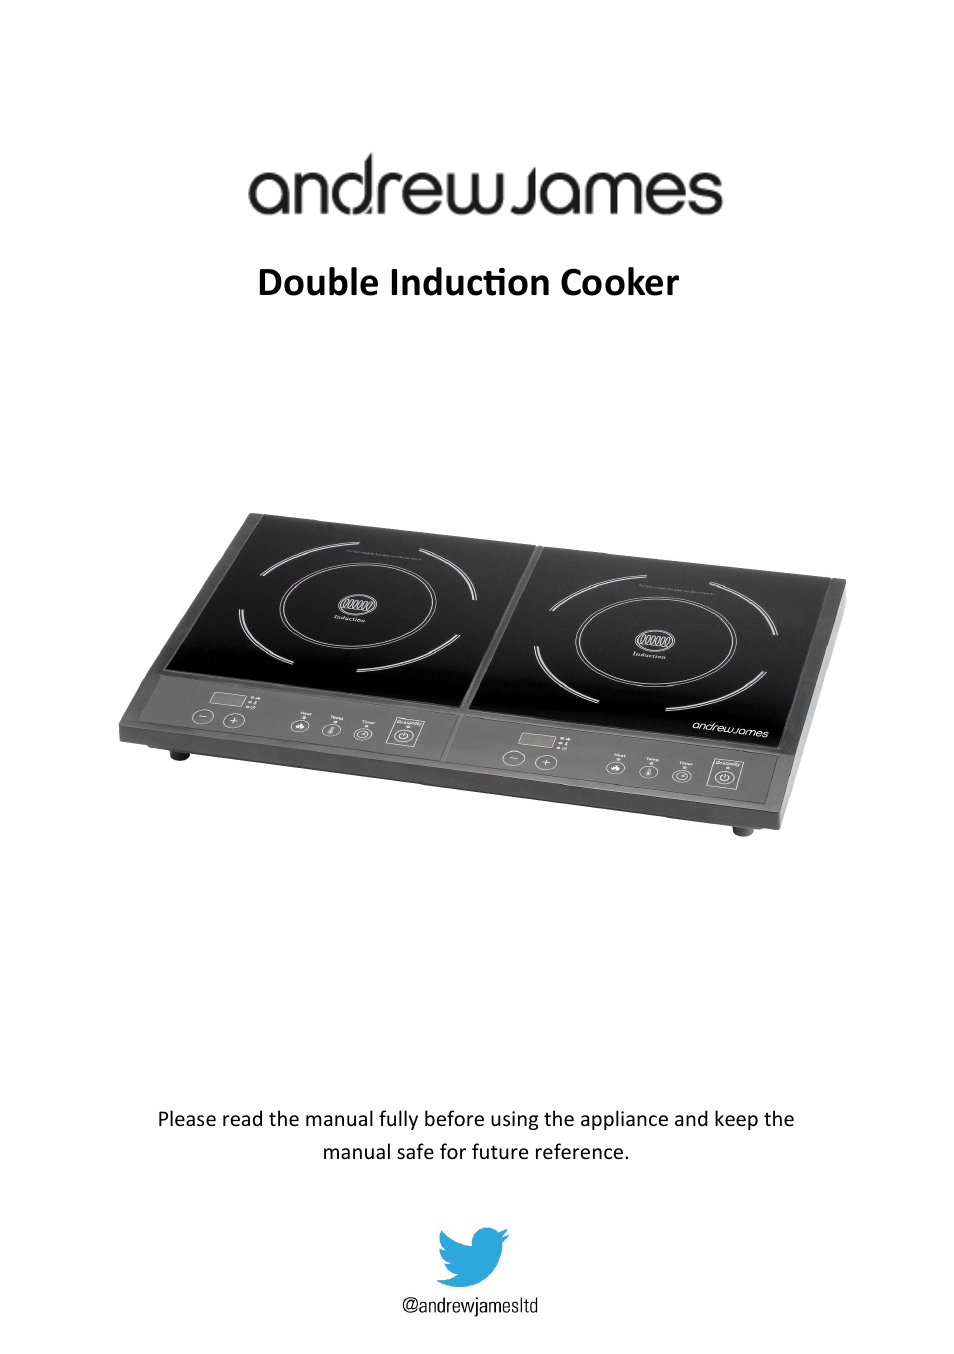 Andrew James AJ000127 Double Induction Hob User Manual | 12 pages